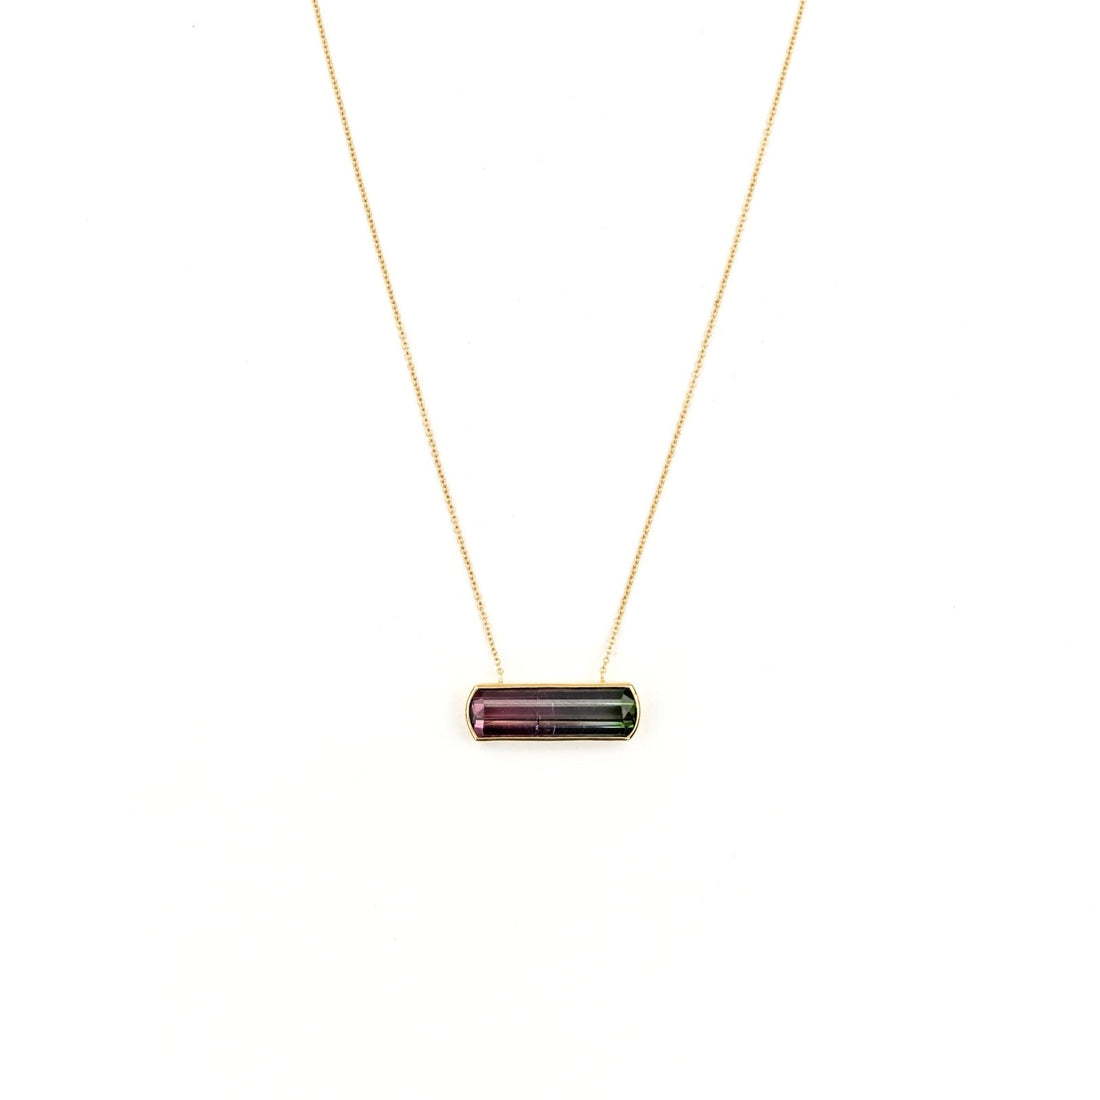 12.23 Carat Watermelon Tourmaline Necklace With Diamond Accents in 14k  White Gold Certified at 4400 - Etsy